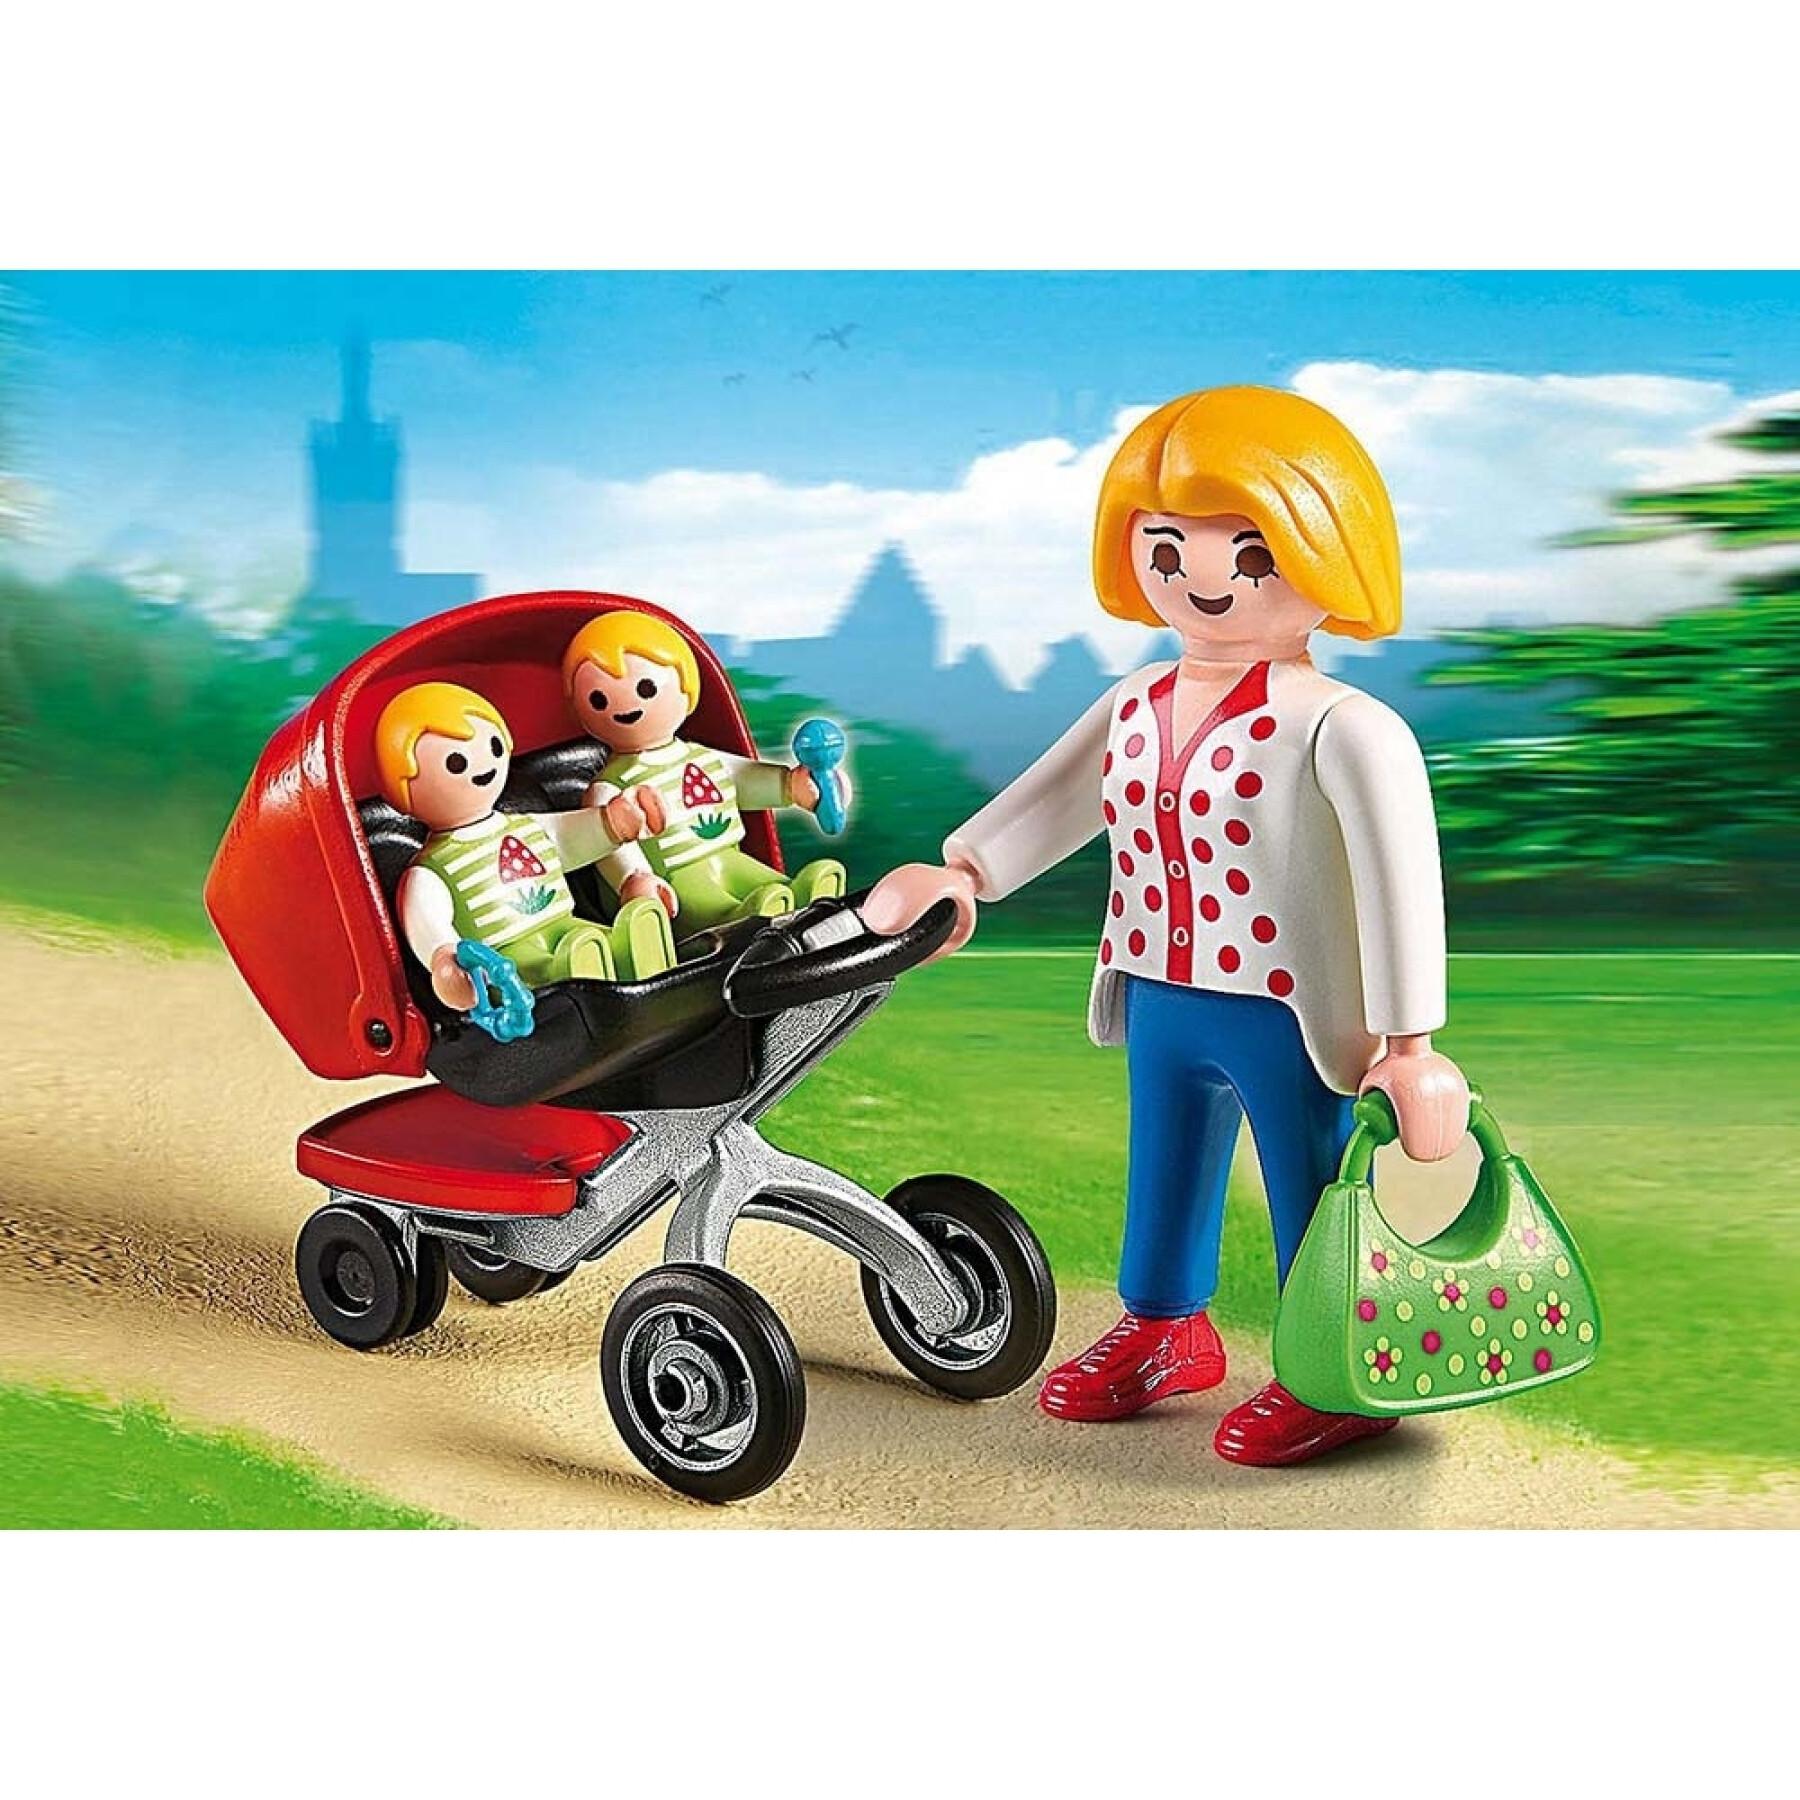 Mommy and twin stroller Playmobil City Life